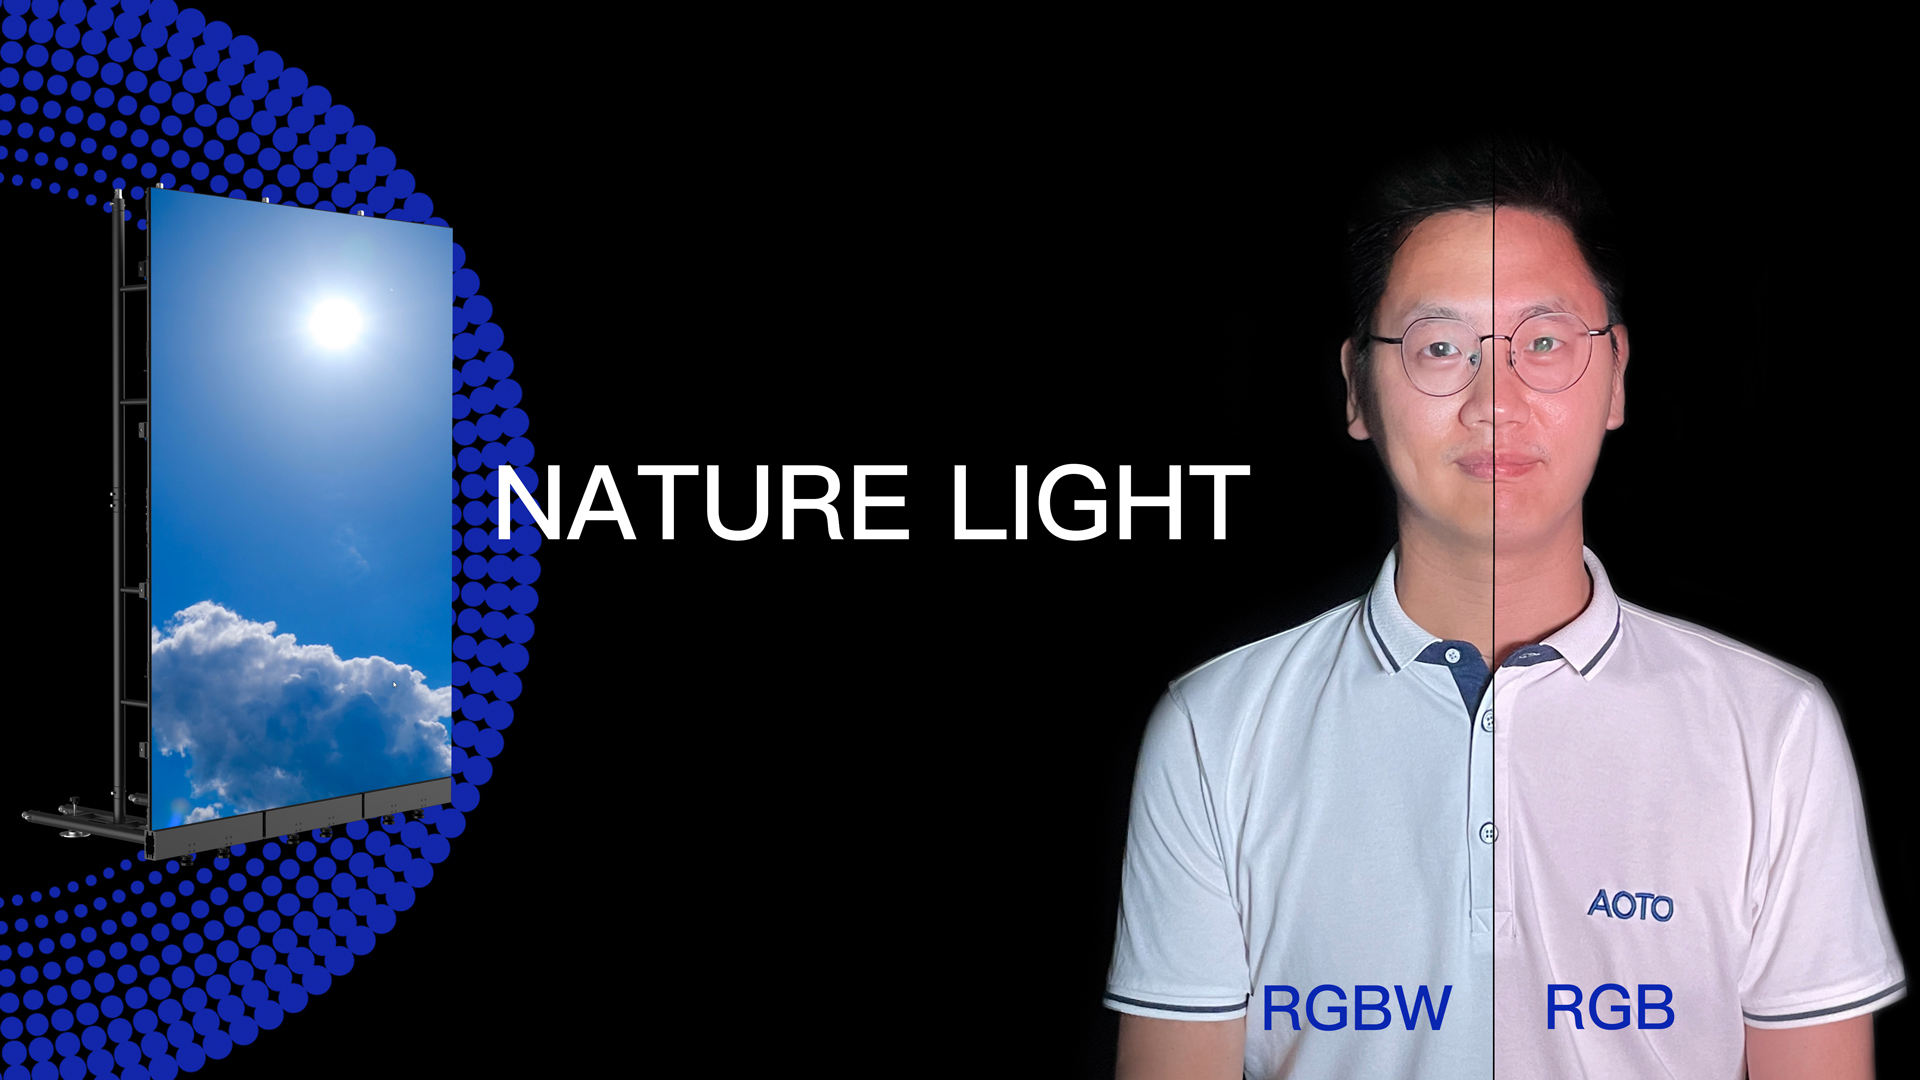 AOTO Leading Display Technology Innovation! RGBW Technology to Bring a More Vibrant LED Display Experience